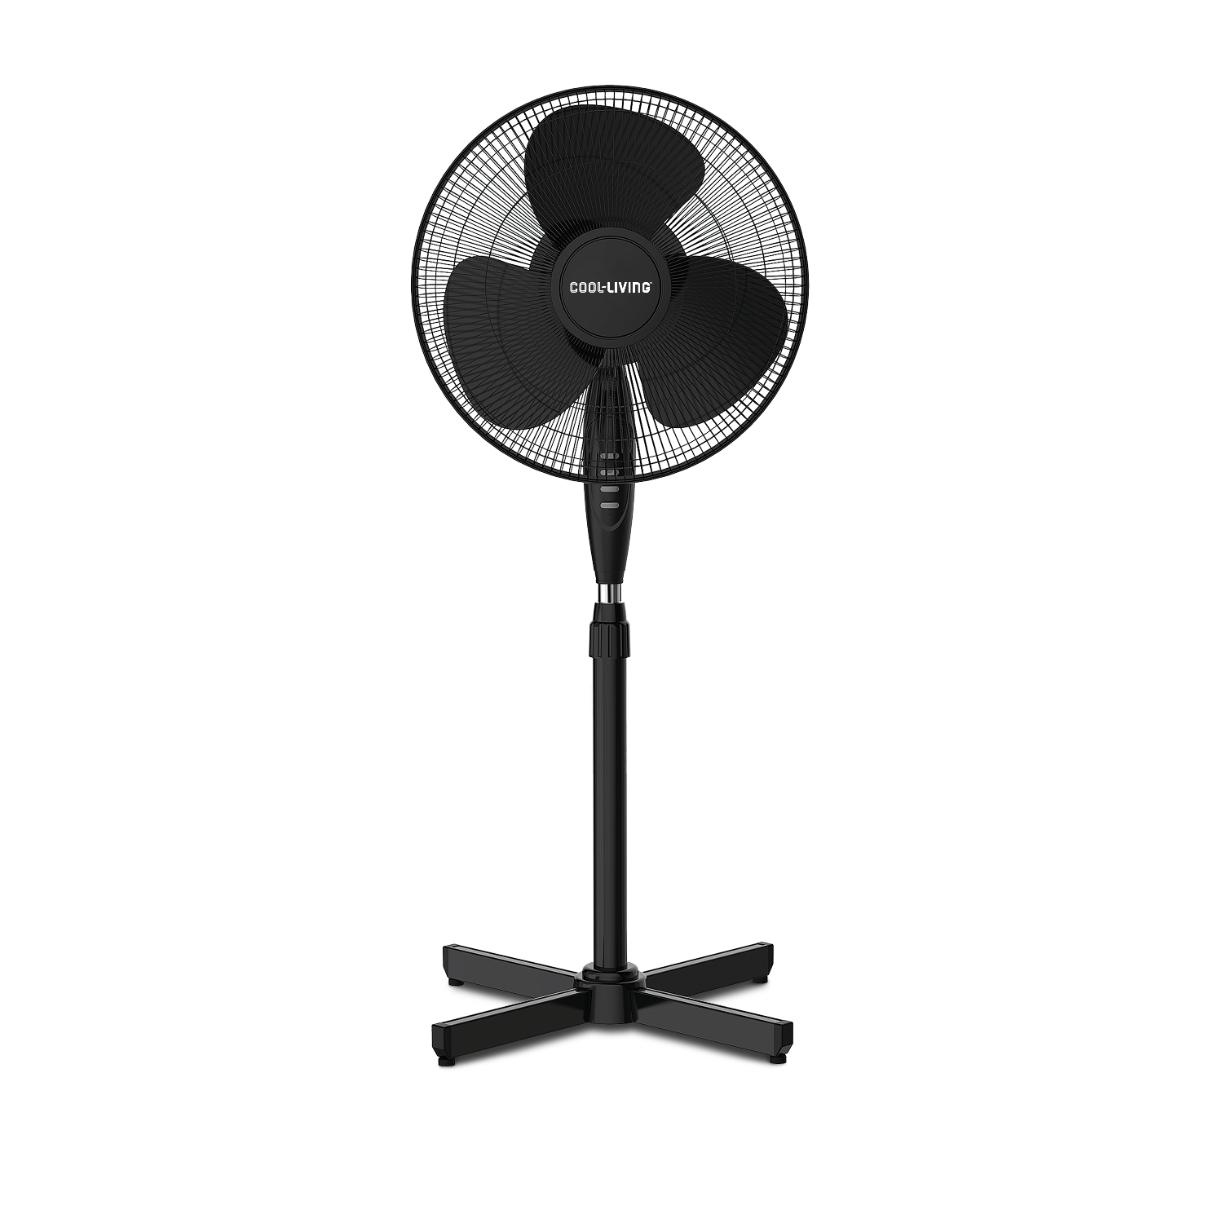 Cool Living 16" Oscillating Pedestal Fan, 3-speed Options, 90-Degree Oscillating Head, Adjustable Height and Tilt, Powerful Air Flow, Ideal for Home, Bedroom & Office, Black or White